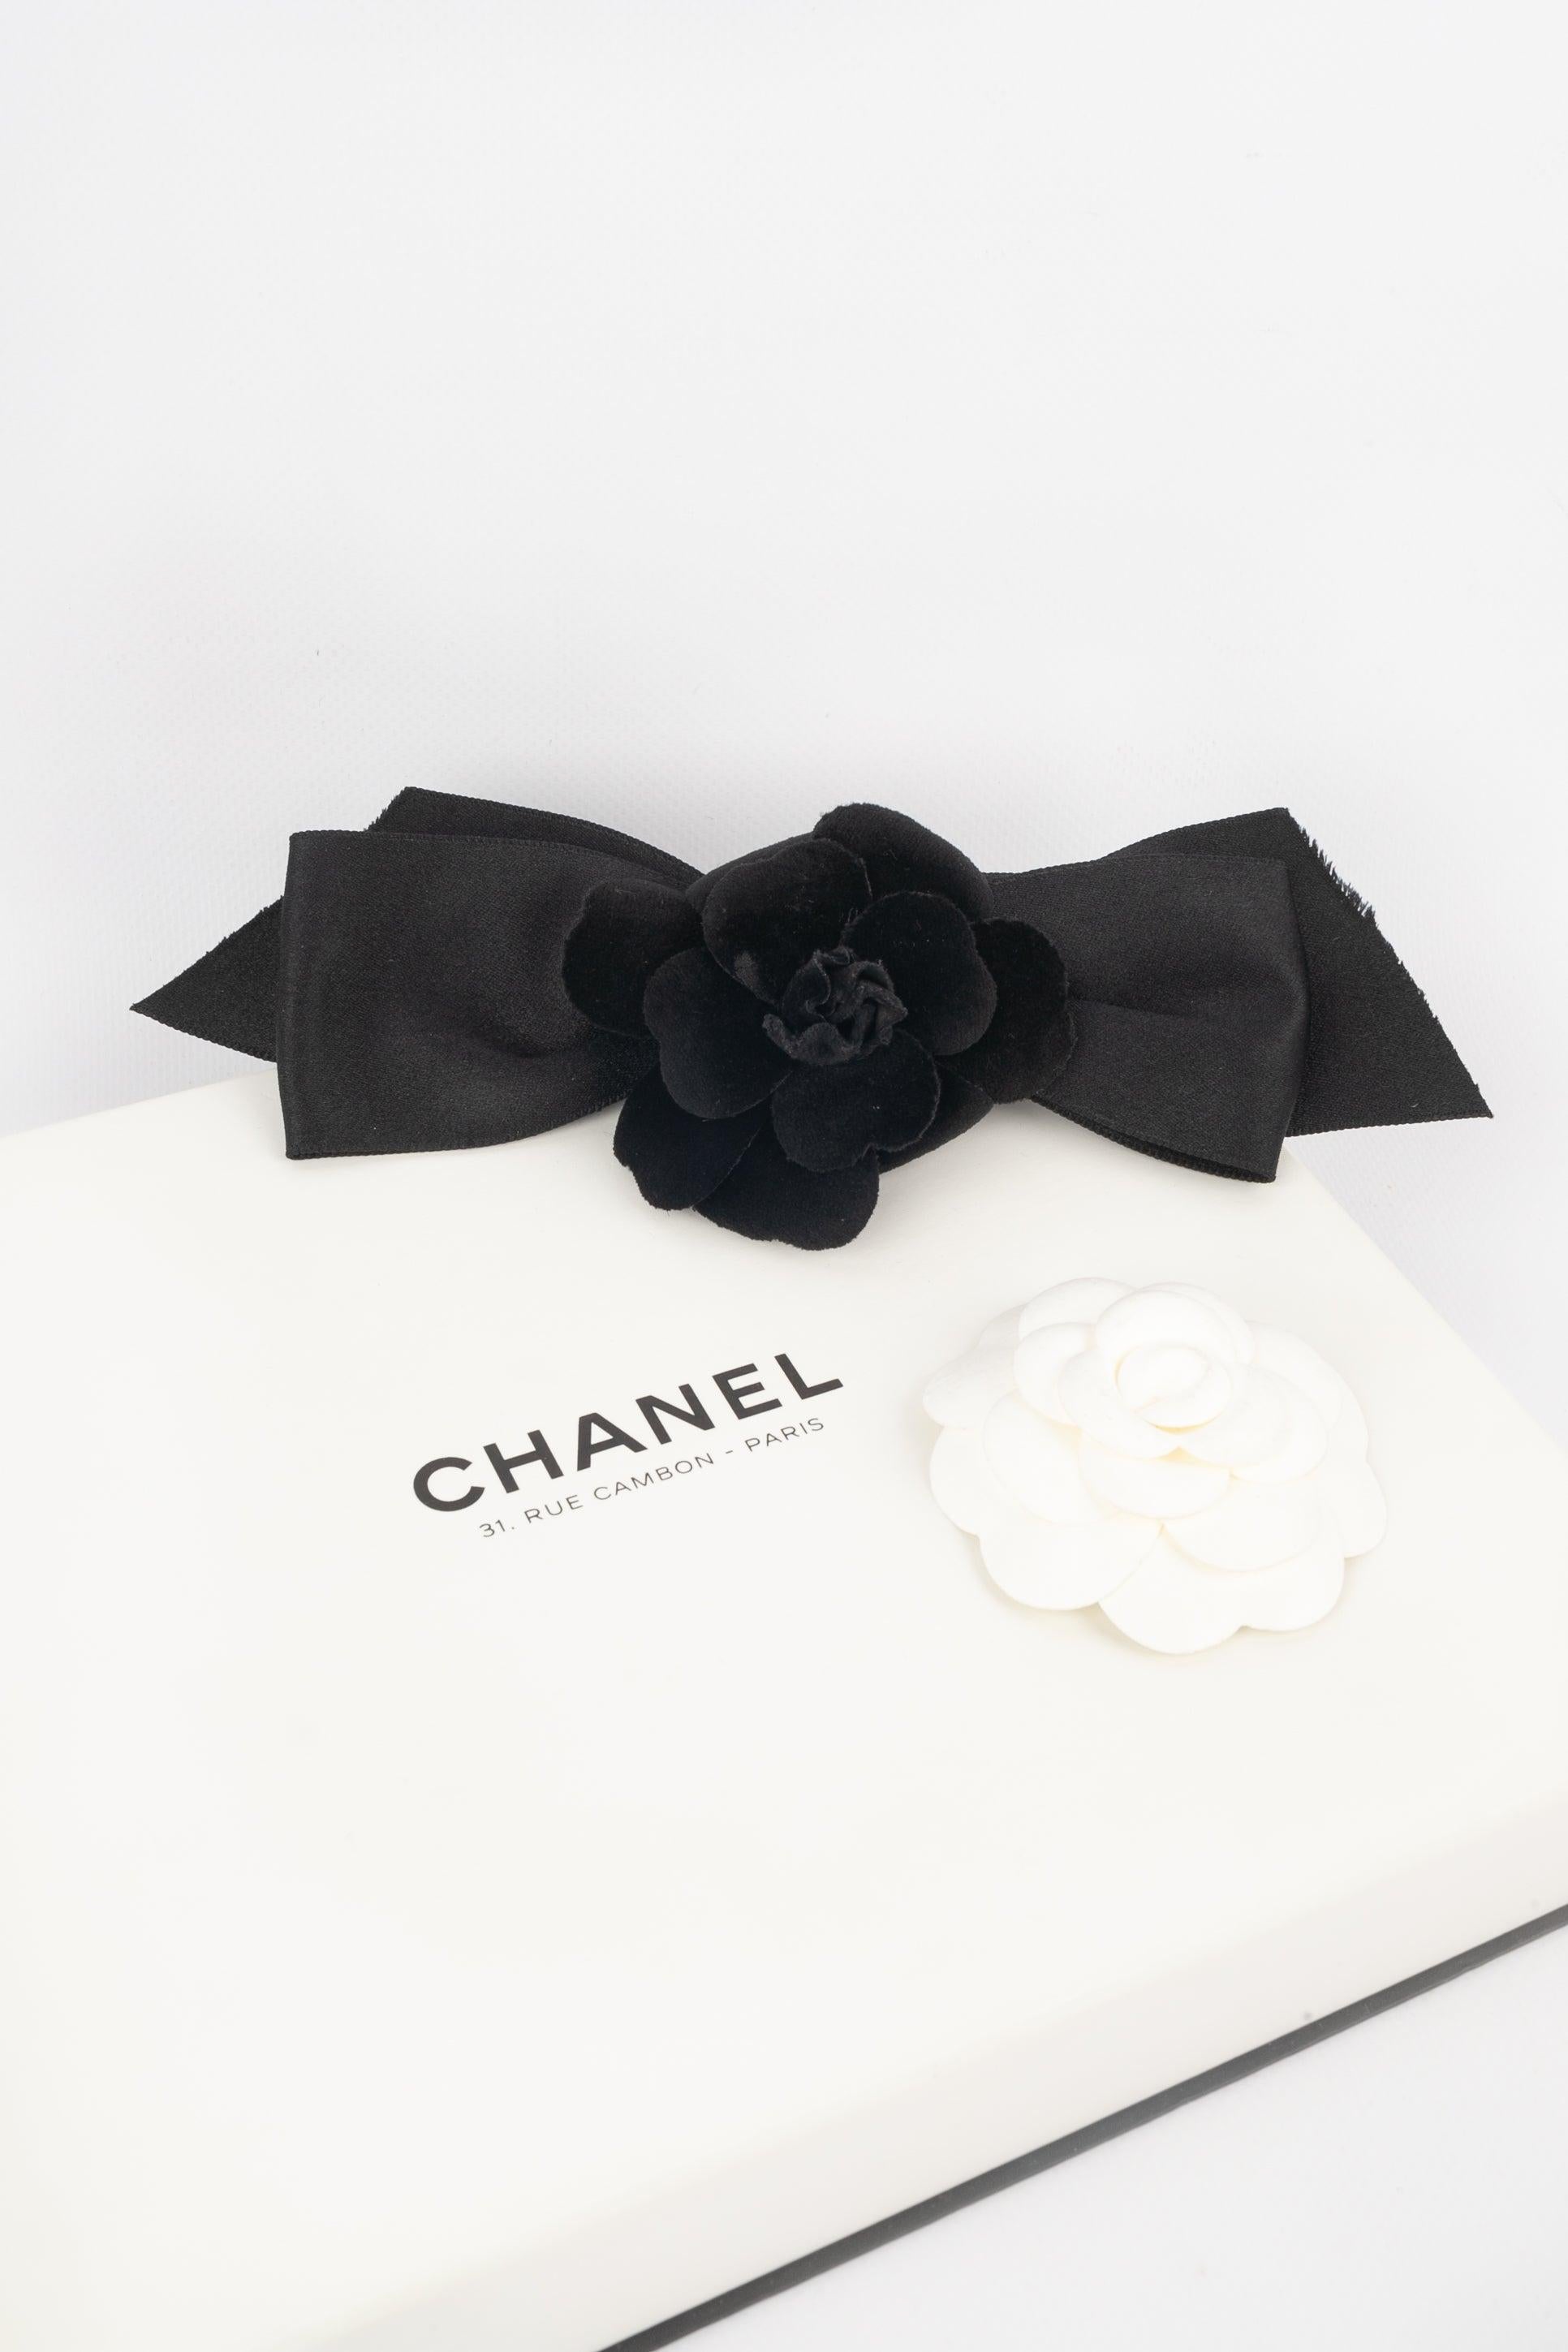 Chanel Head Accessory Black Bow with Velvet Camellia For Sale 3